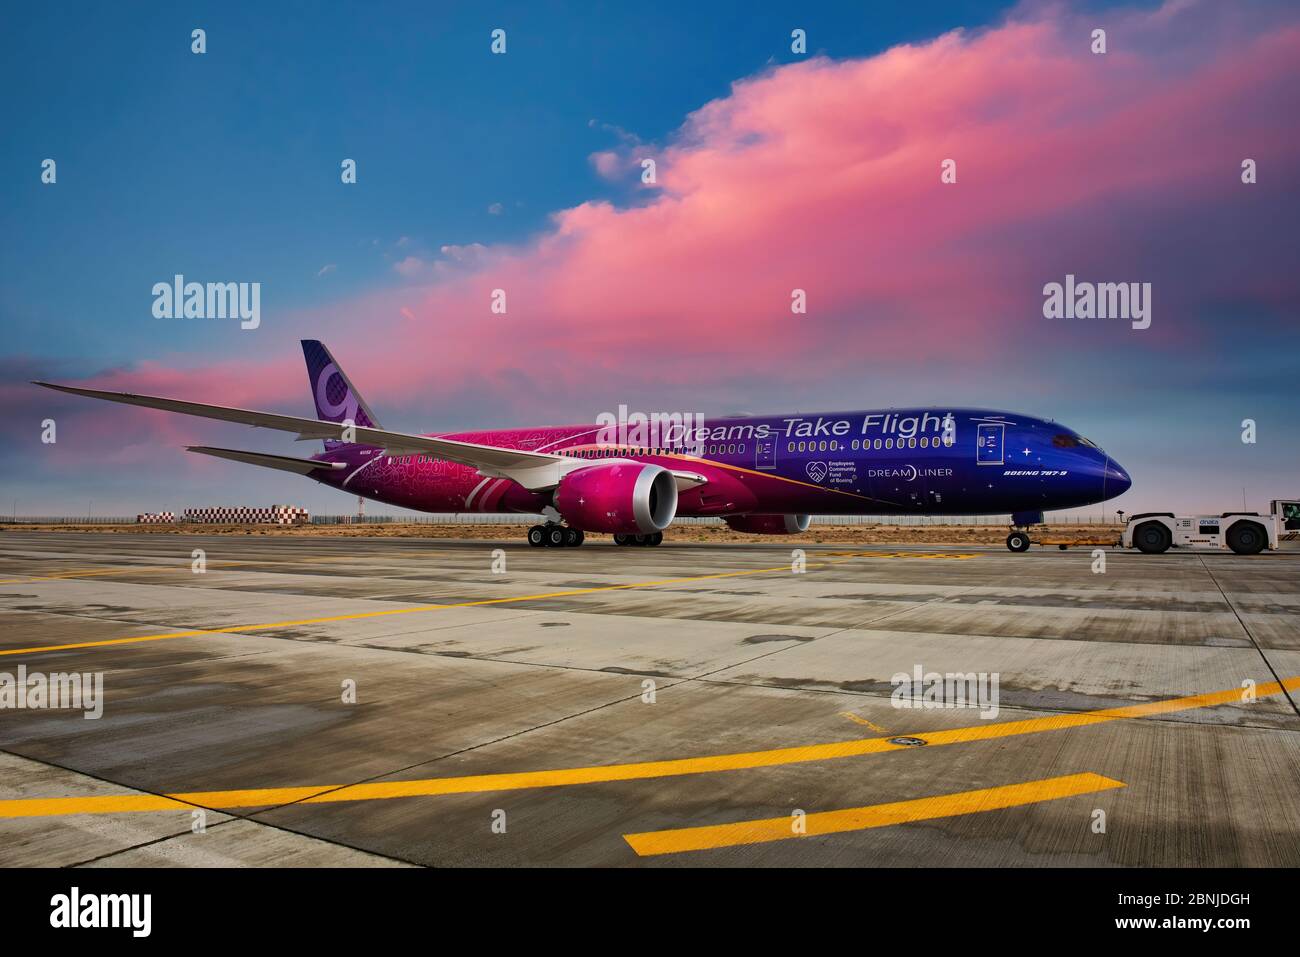 Boeing 787 Dreamliner in special livery Dreams Take Flight, Dubai, United Arab Emirates, Middle East Stock Photo